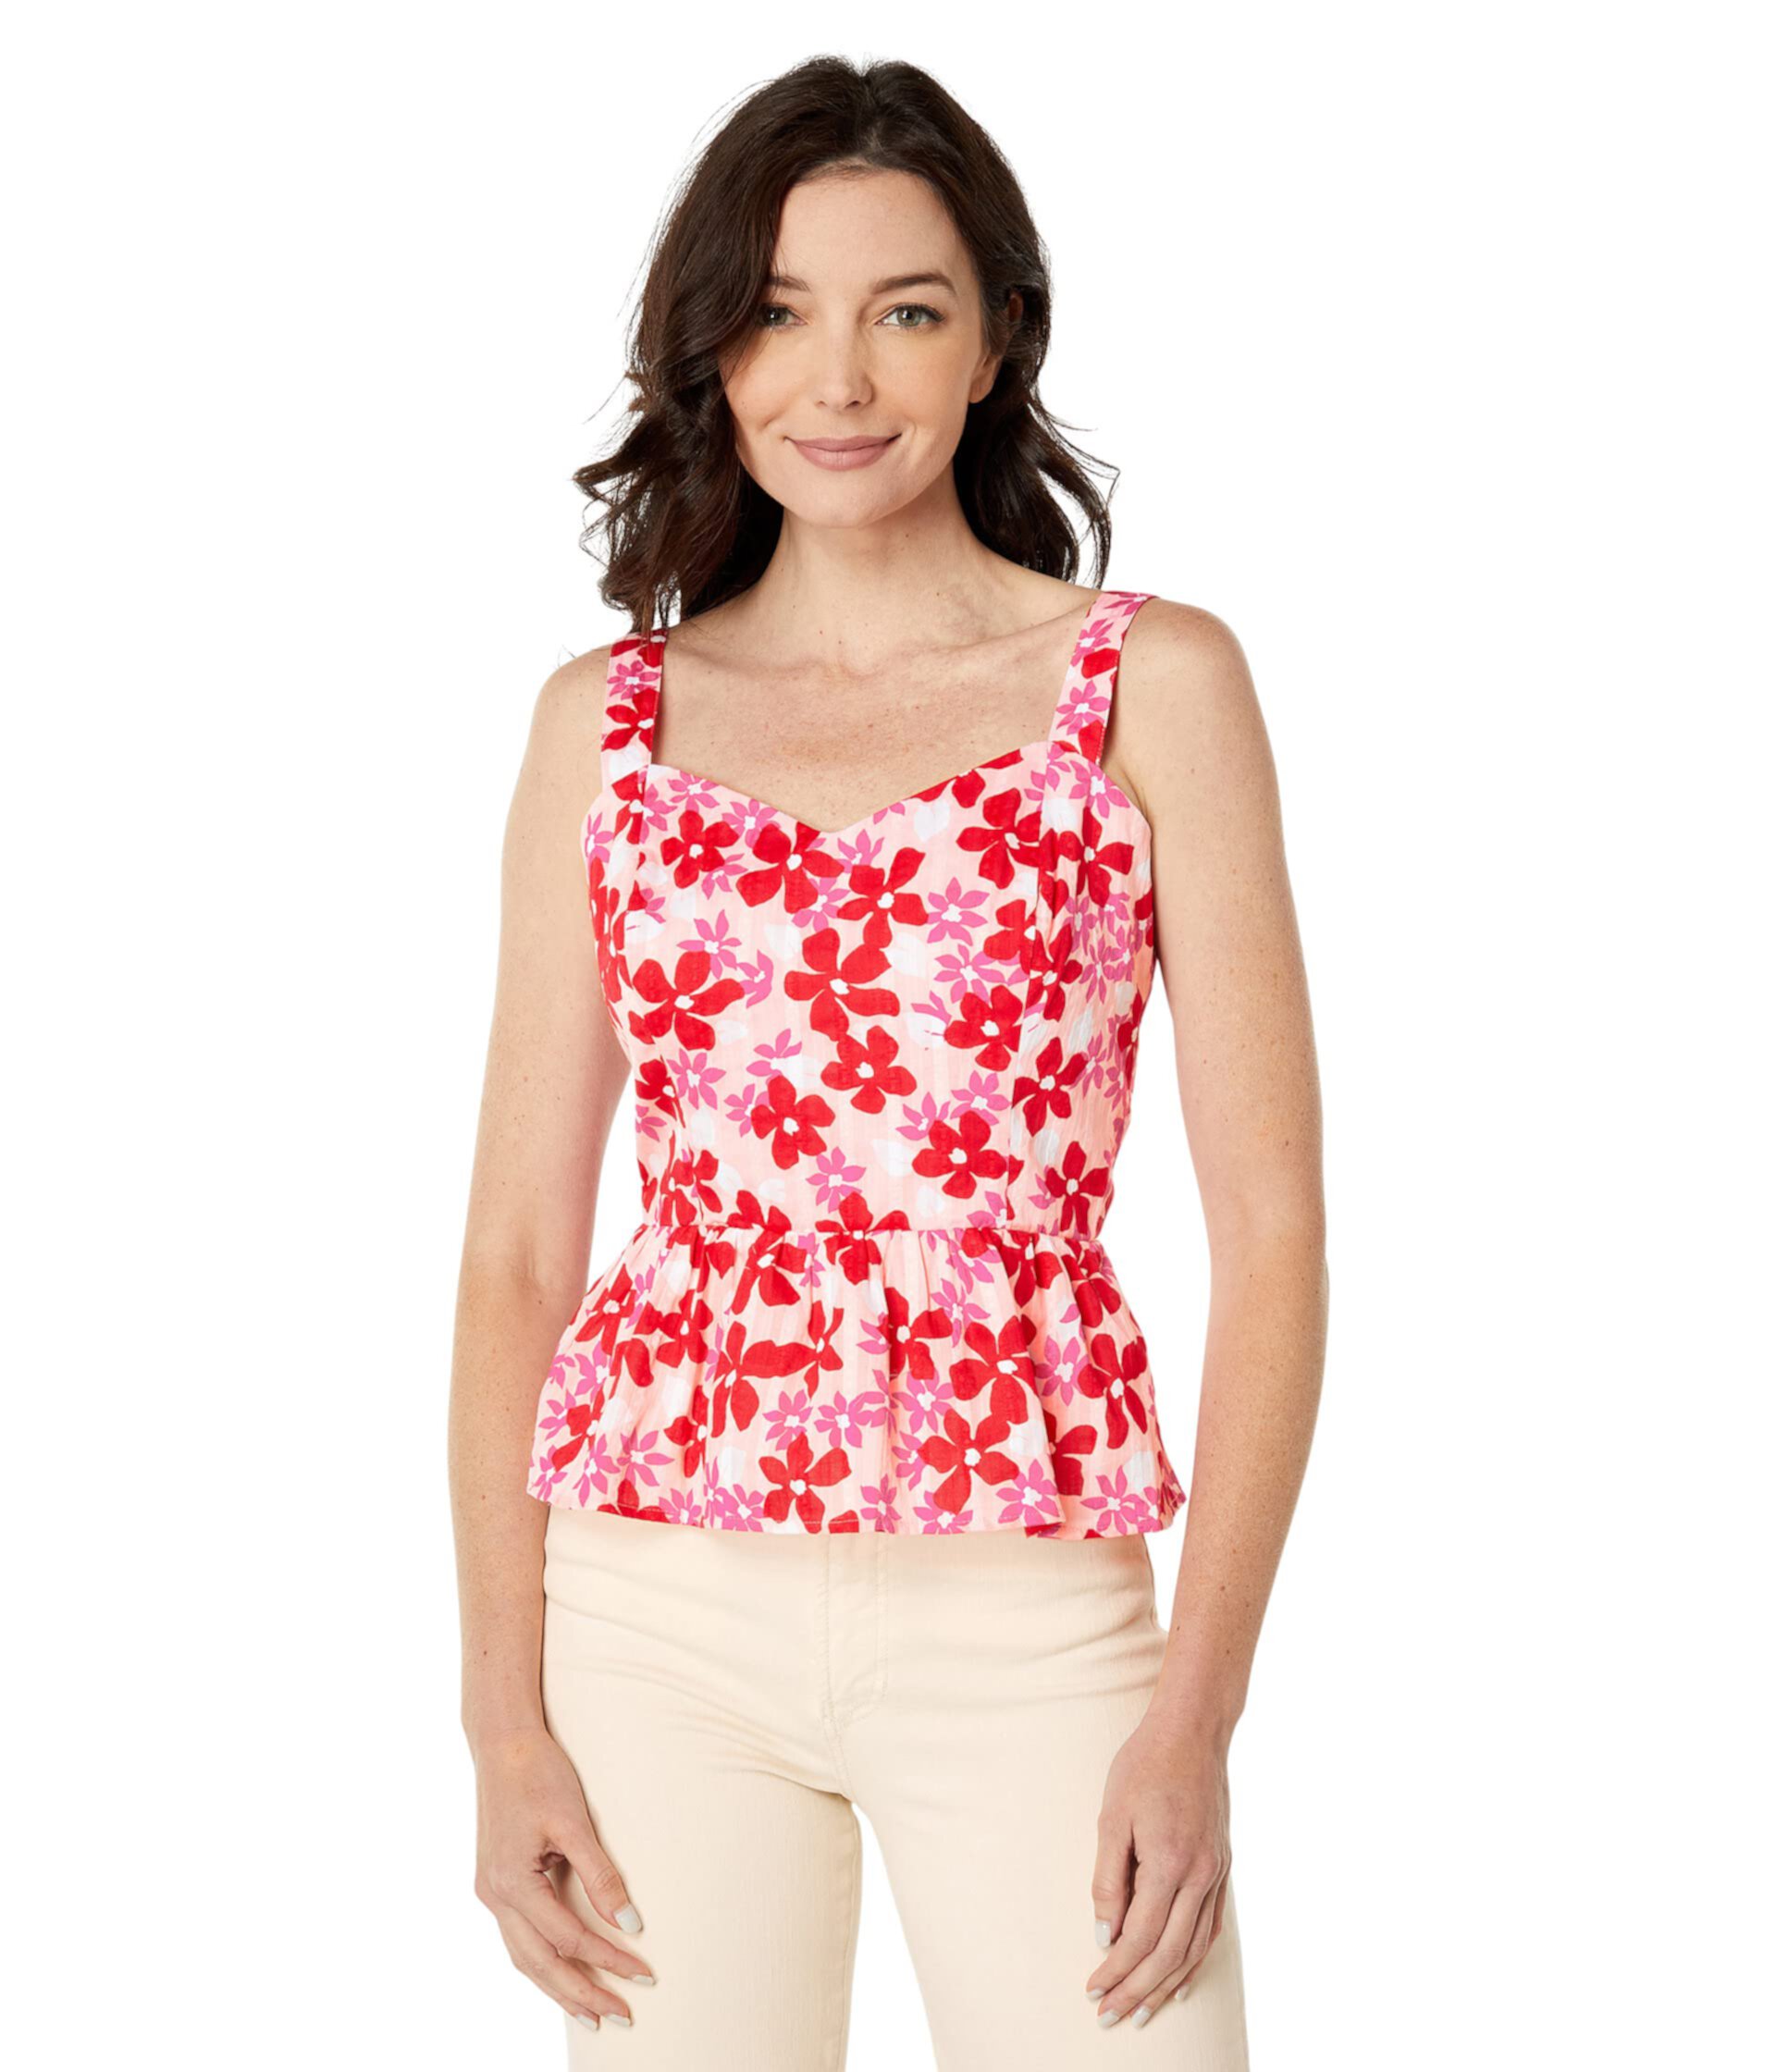 Martie Tie Back Top in Exploded Daisies DRAPER JAMES